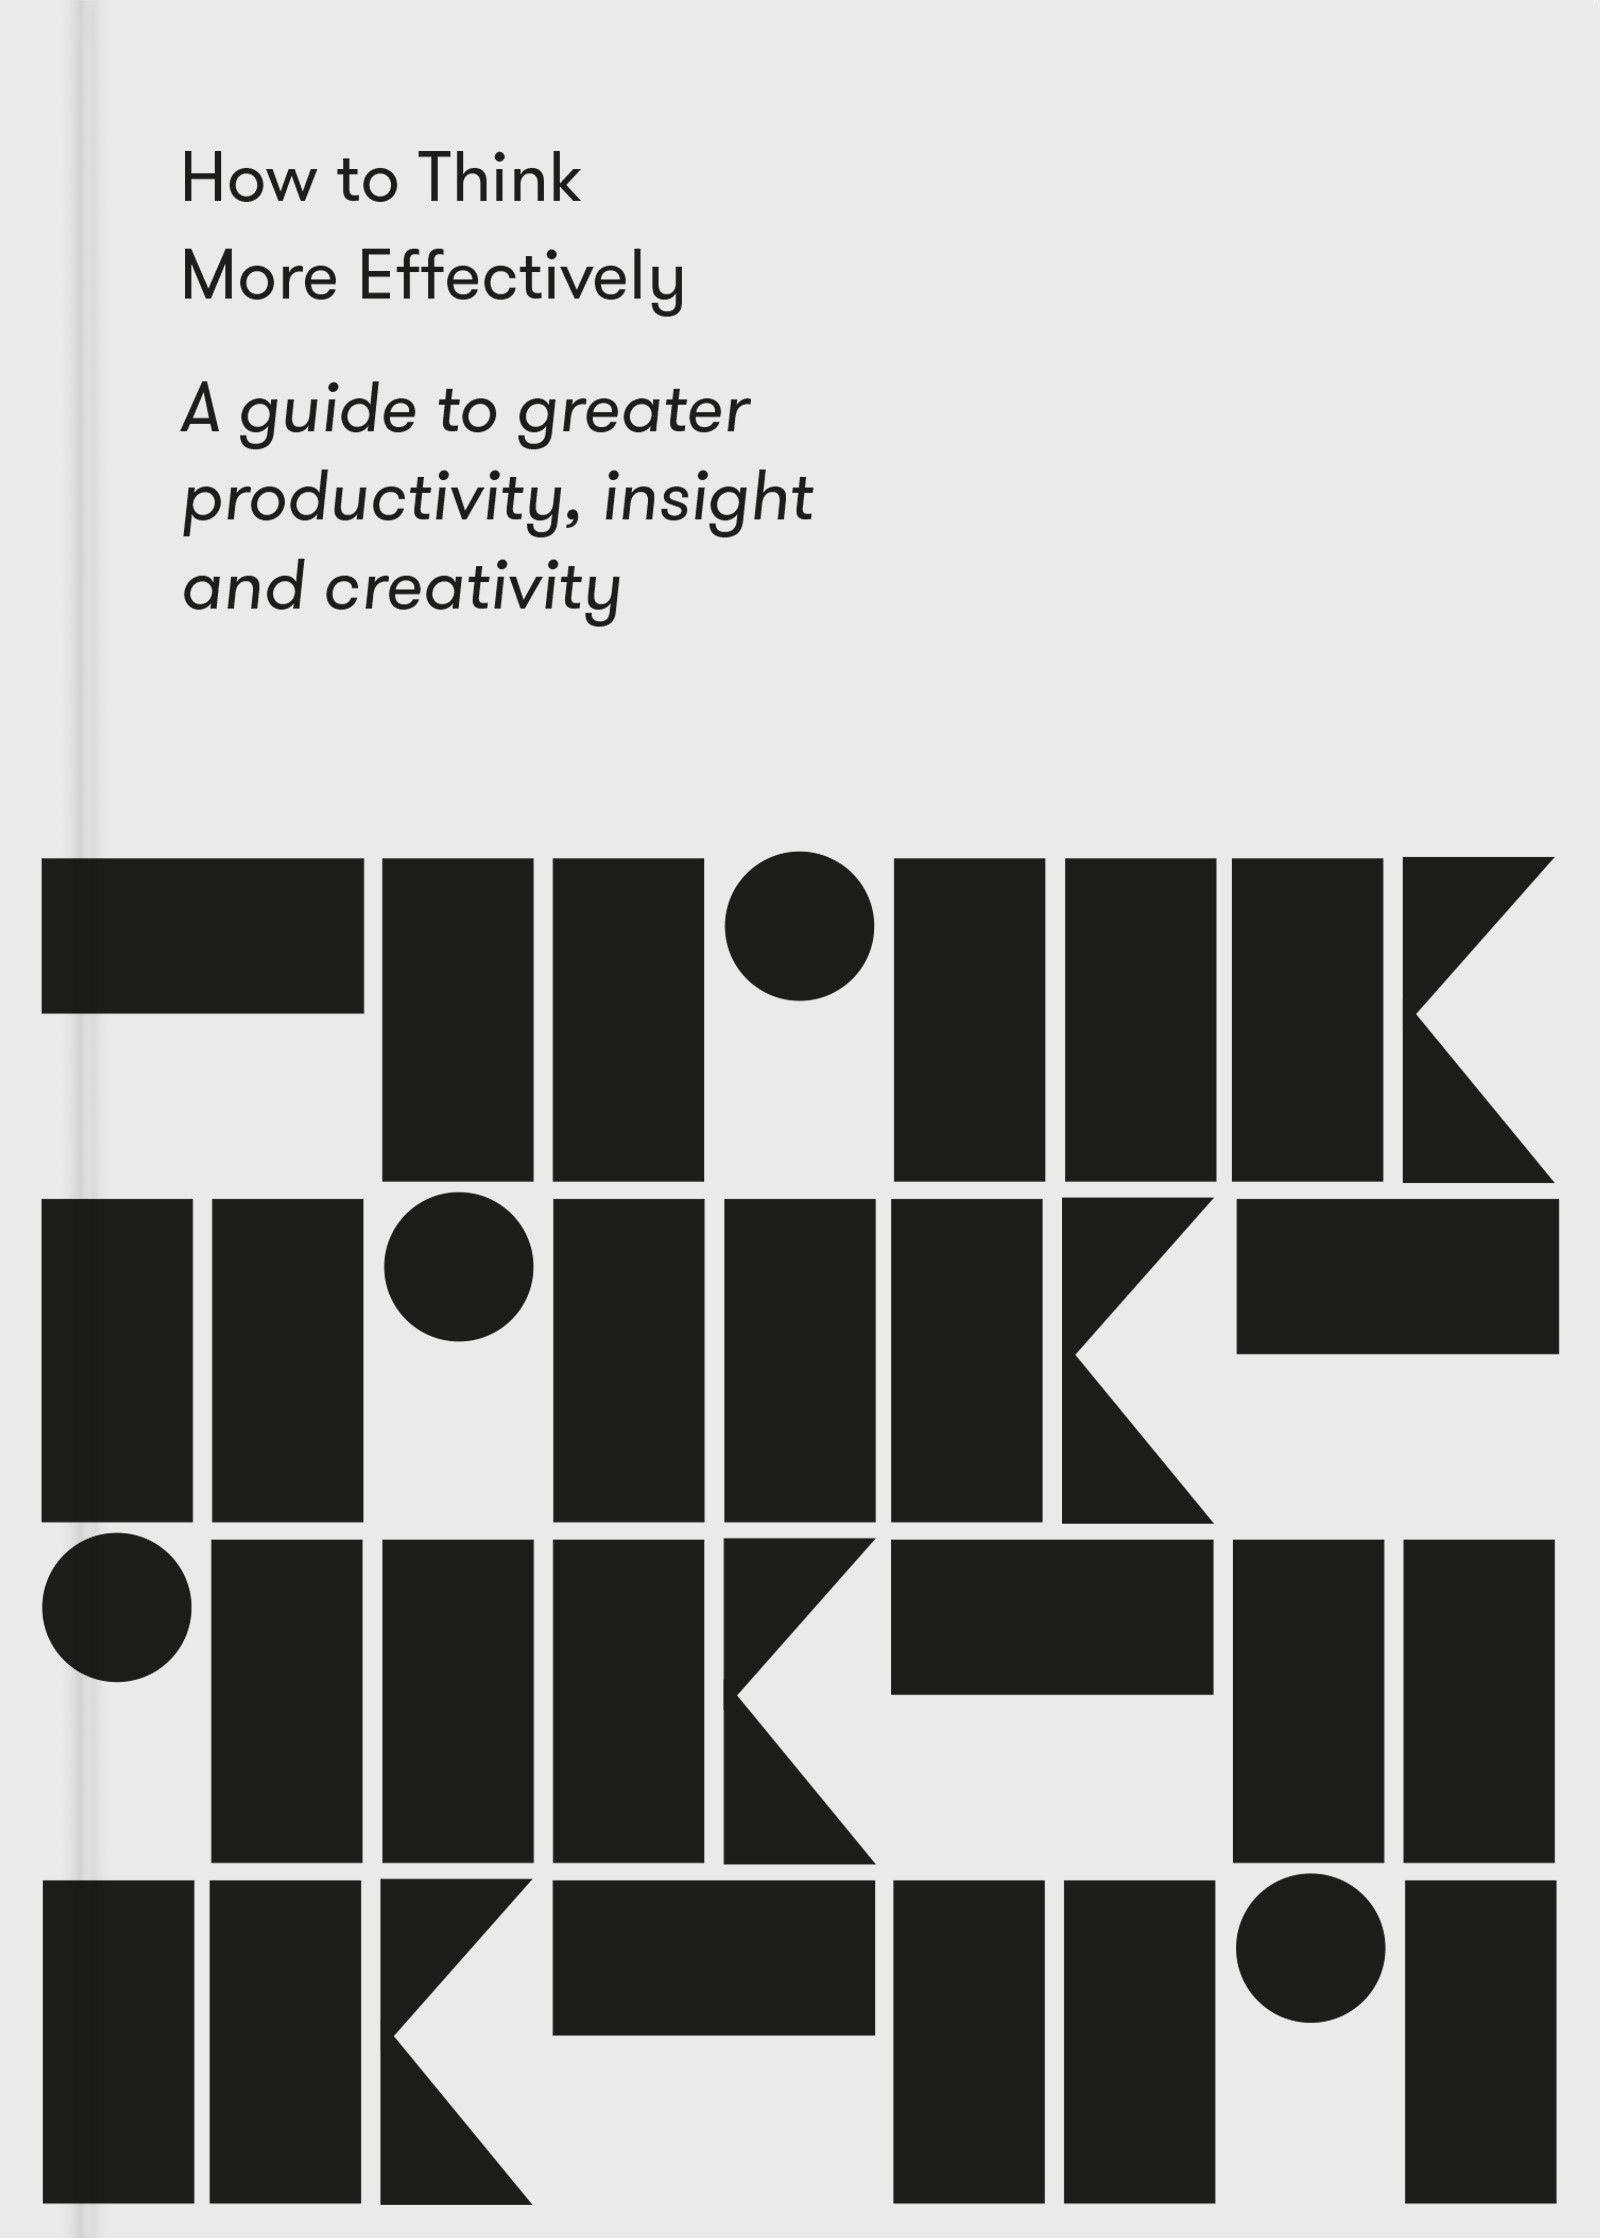 How to Think More Effectively: A Guide to Greater Productivity, Insight and Creativity, Fachbücher von The School of Life